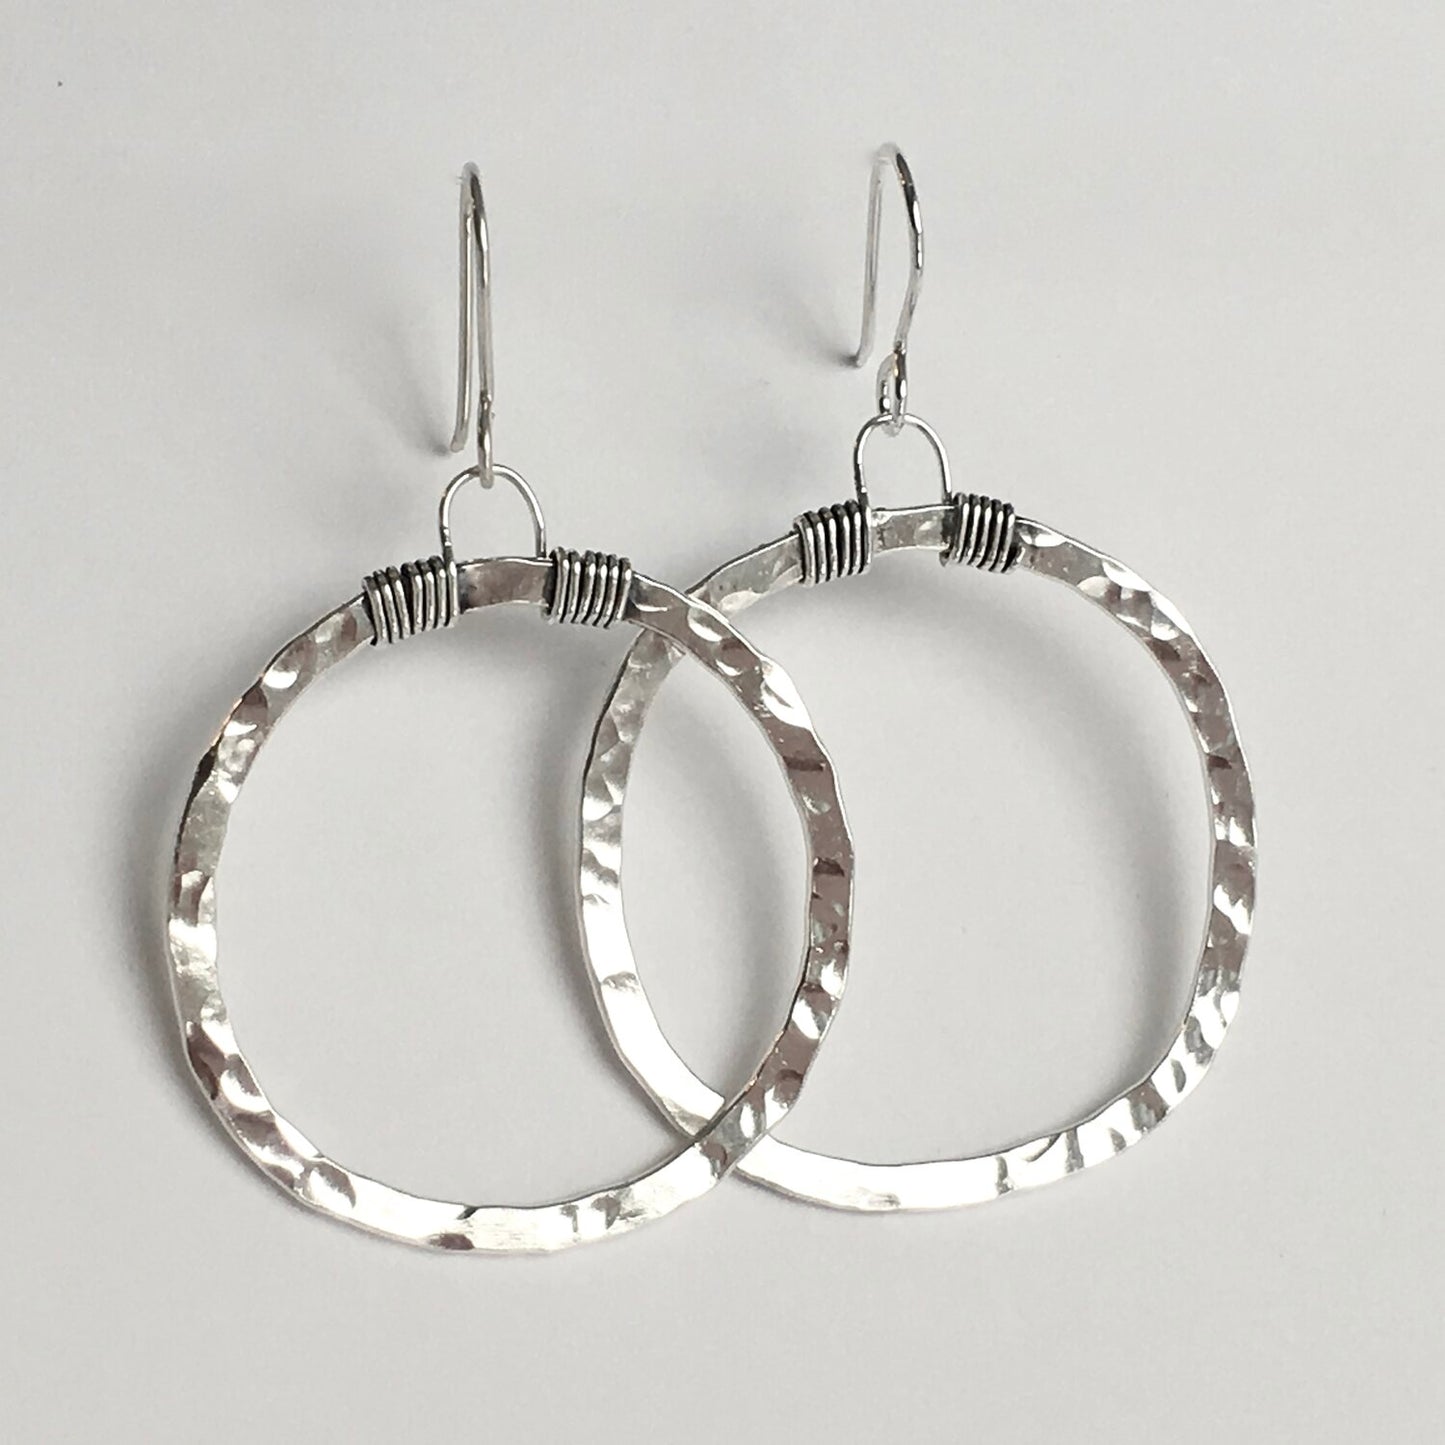 Large Signature Hoop Earrings by Cullen Jewelry Design